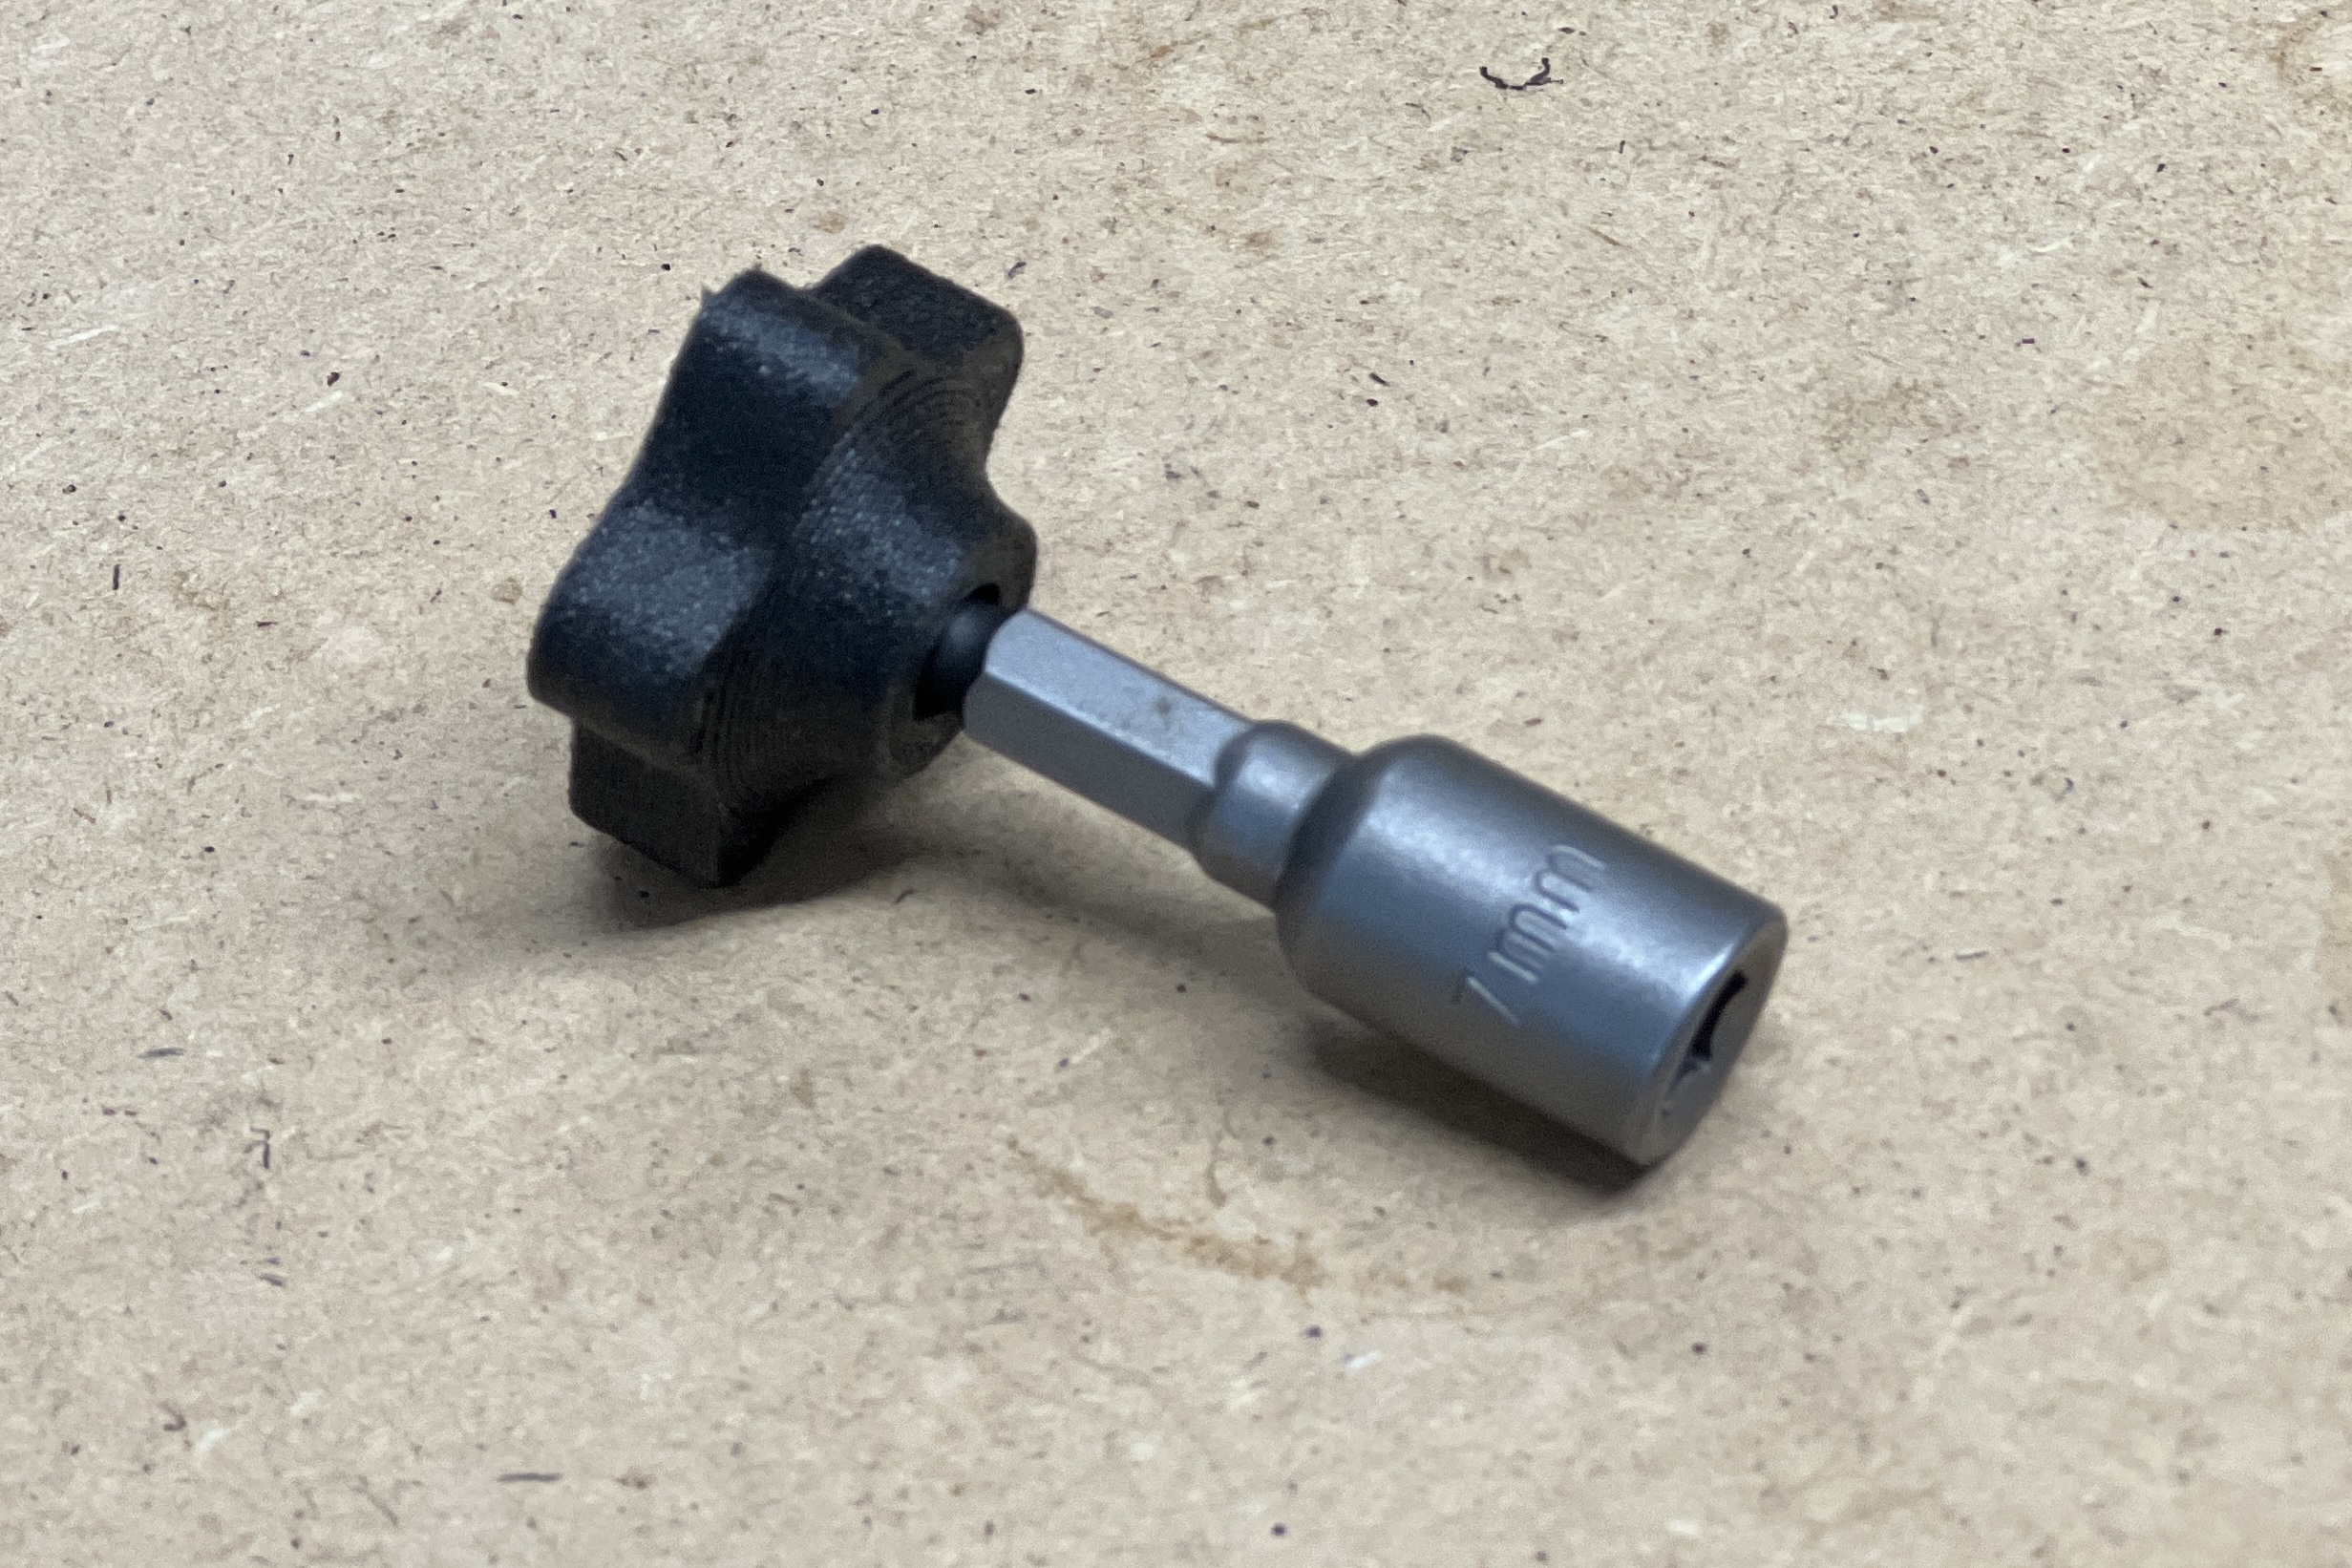 Miniature Nozzle Wrench by thomers | Download free STL model ...